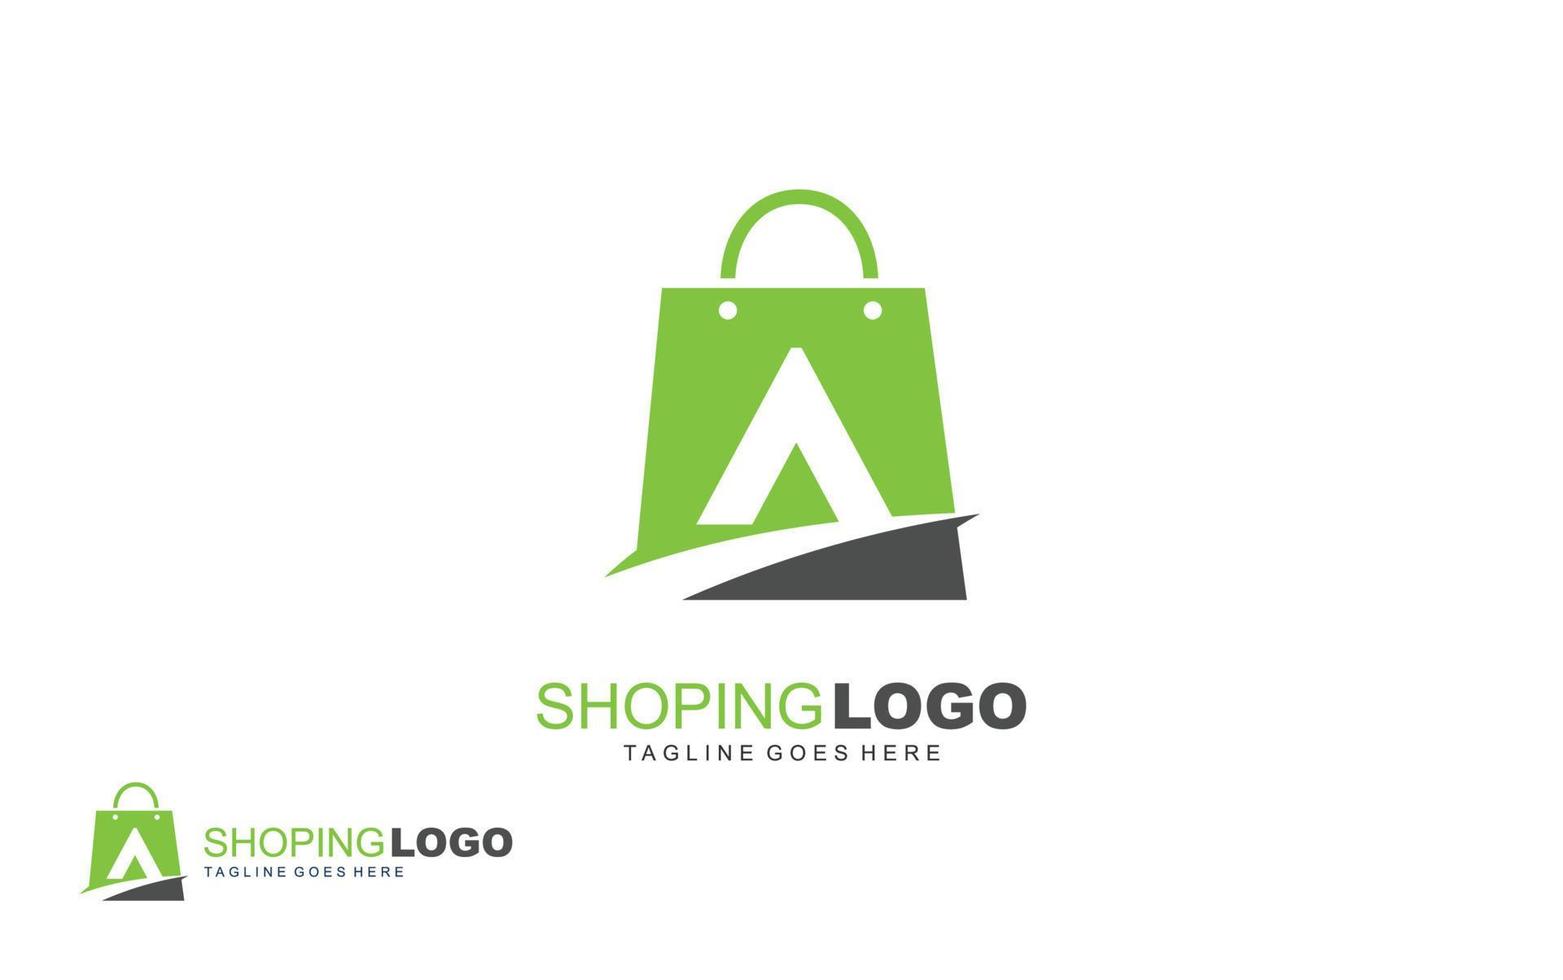 A logo ONLINESHOP for branding company. BAG template vector illustration for your brand.